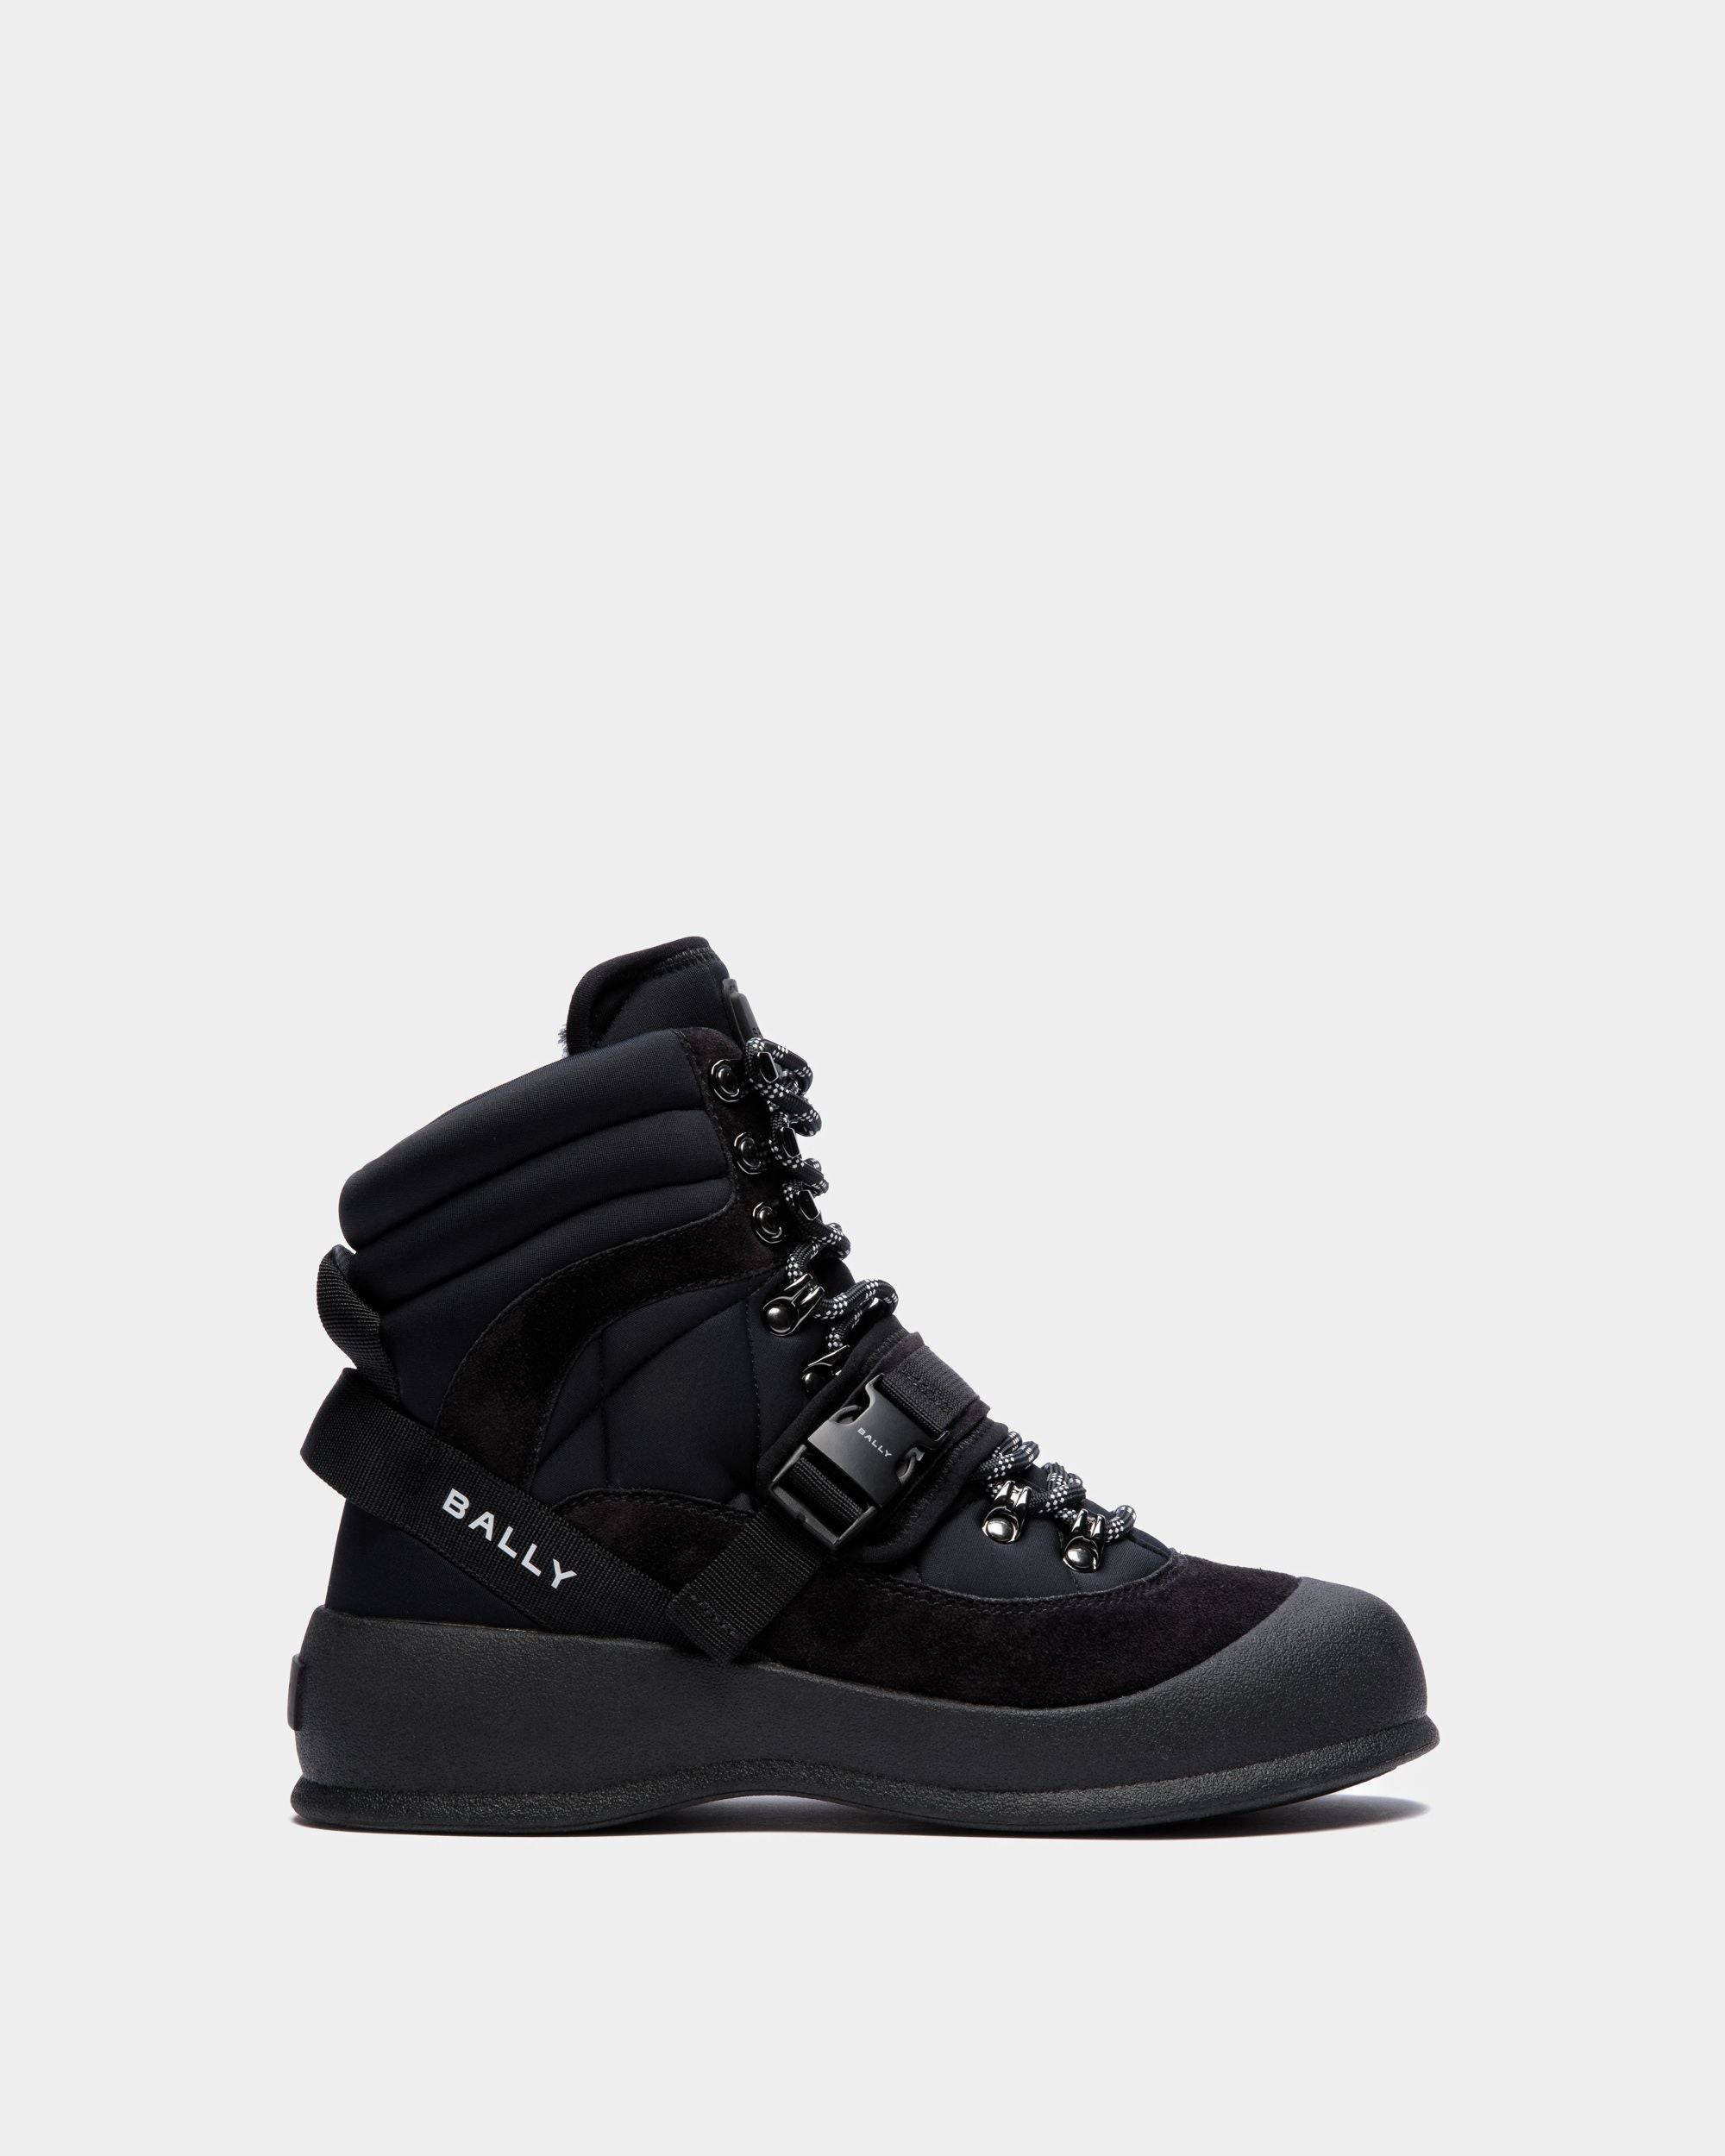 Frei | Women's Lace-Up Boot in Black Nylon | Bally | Still Life Side